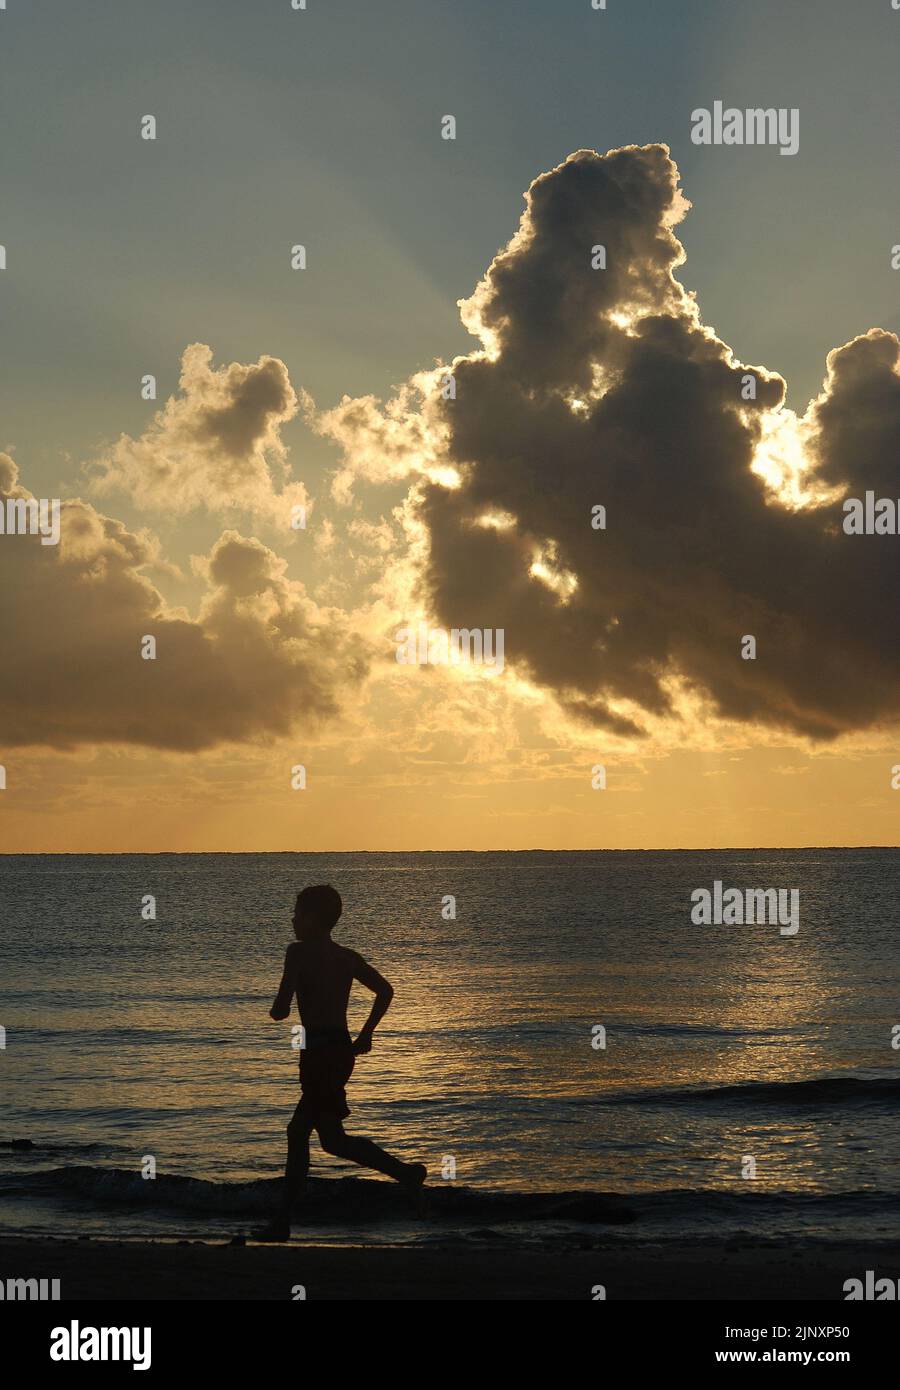 The silhouette of a young boy running along the seashore at dawn against a cloudy tropical sky Stock Photo